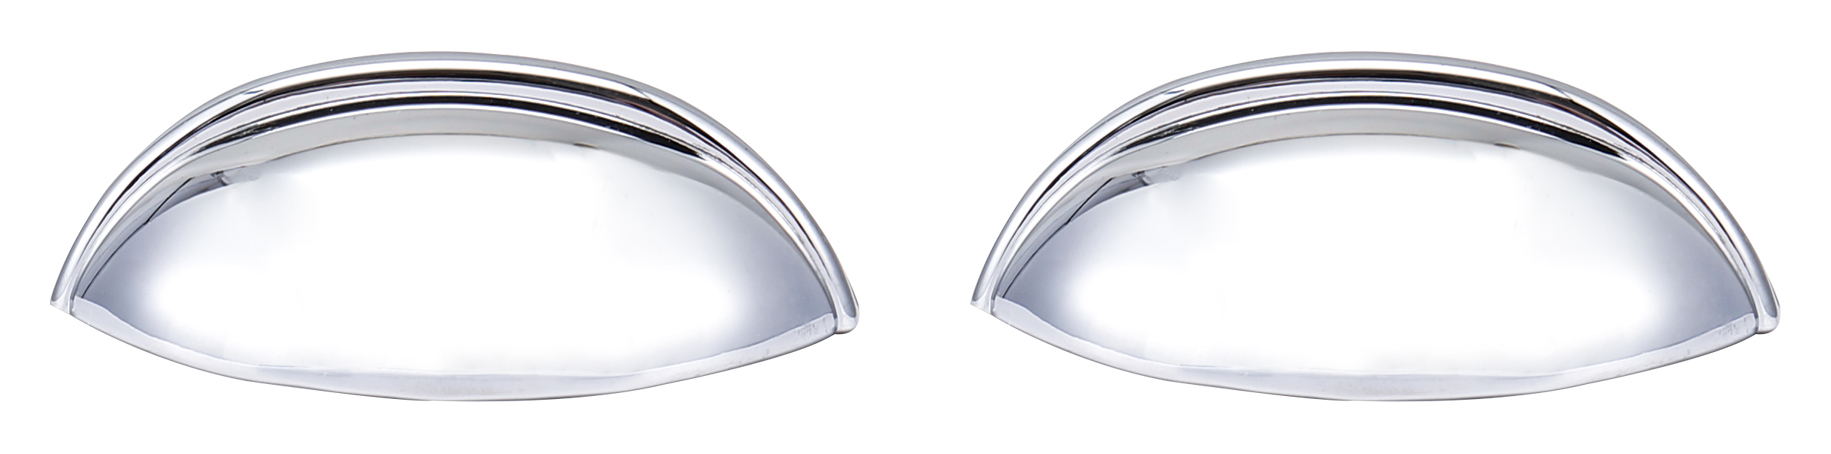 Image of Cup Cabinet Handle Polished Chrome 84mm - Pack of 2